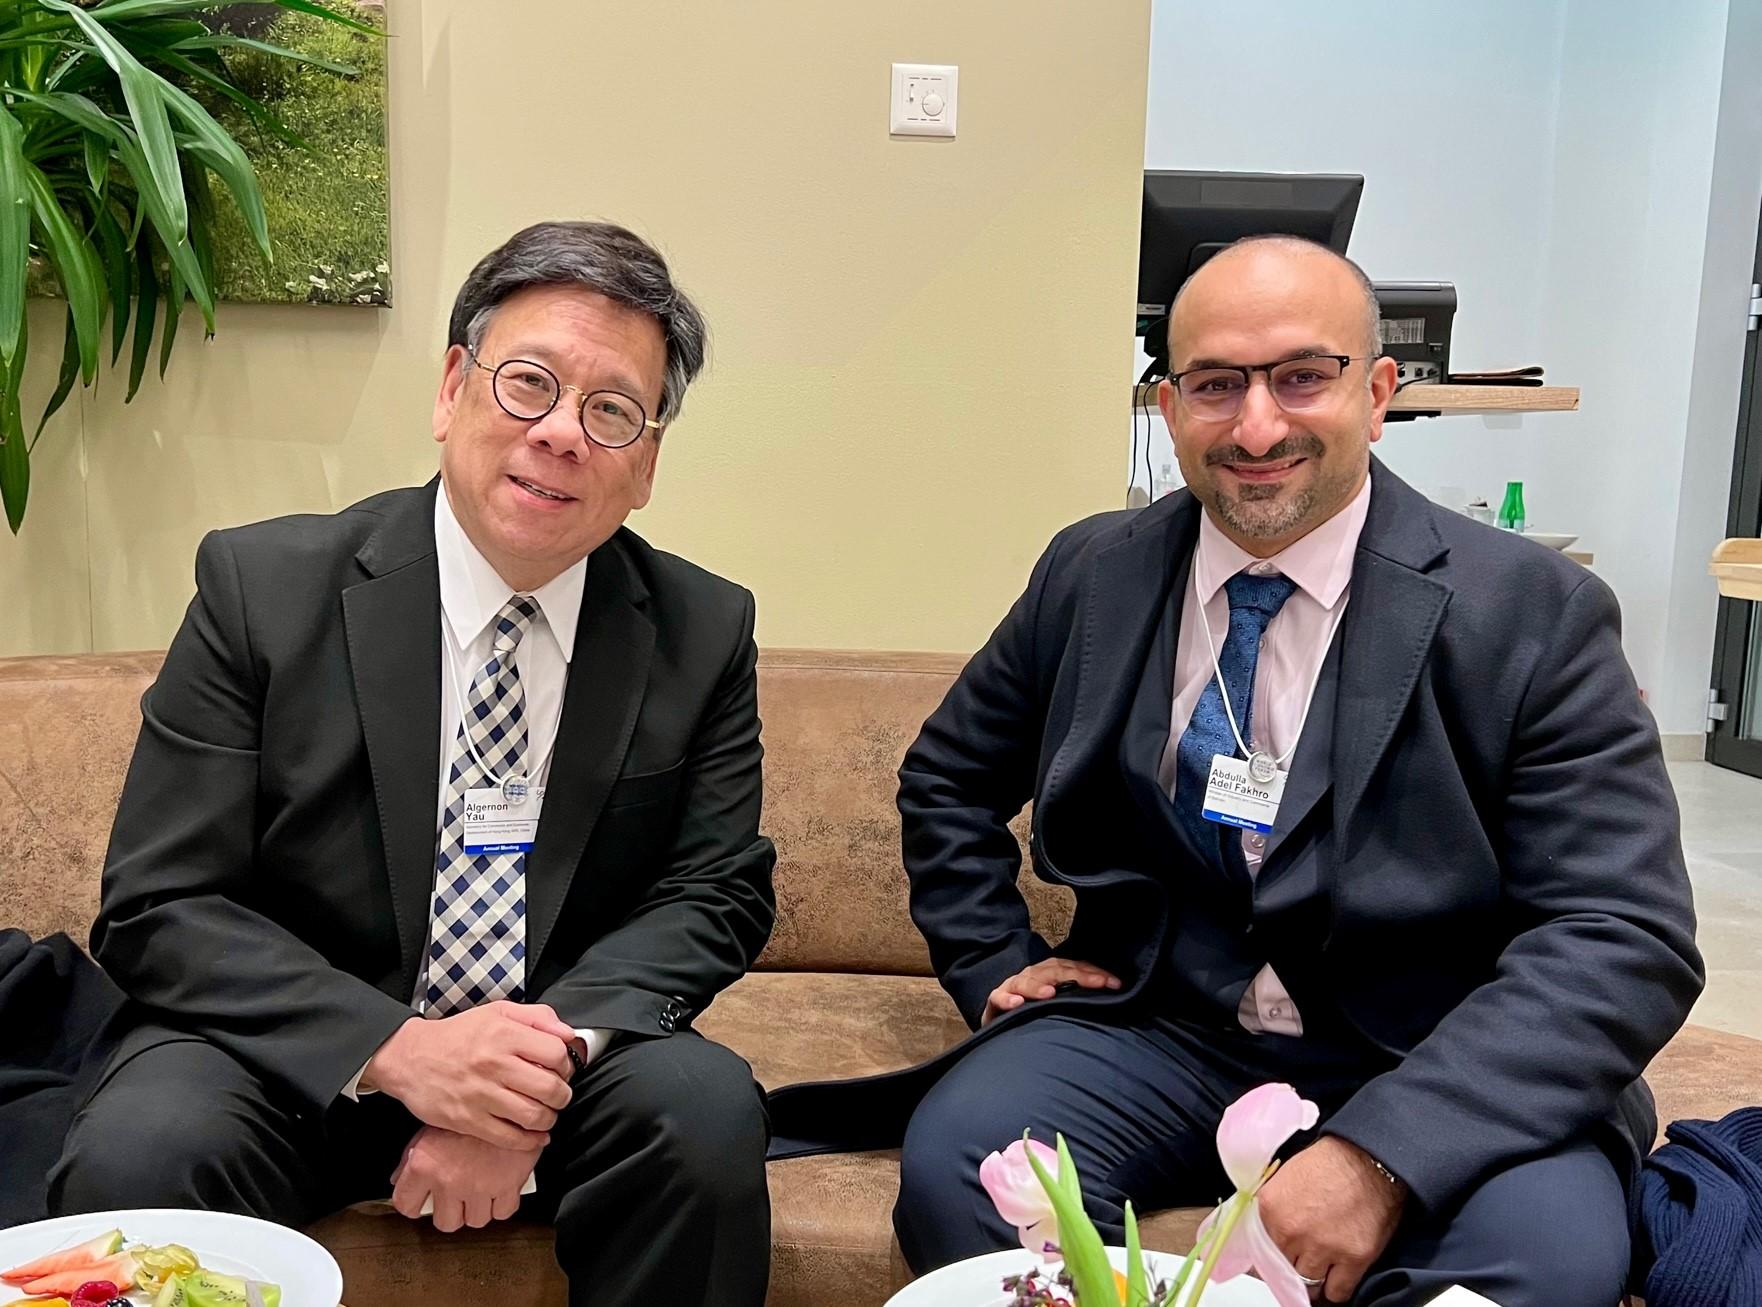 The Secretary for Commerce and Economic Development, Mr Algernon Yau (left), meets with the Minister of Industry and Commerce of Bahrain, Mr Abdulla Adel Fakhro (right), on January 18 (Davos time) during the World Economic Forum Annual Meeting at Davos, Switzerland.